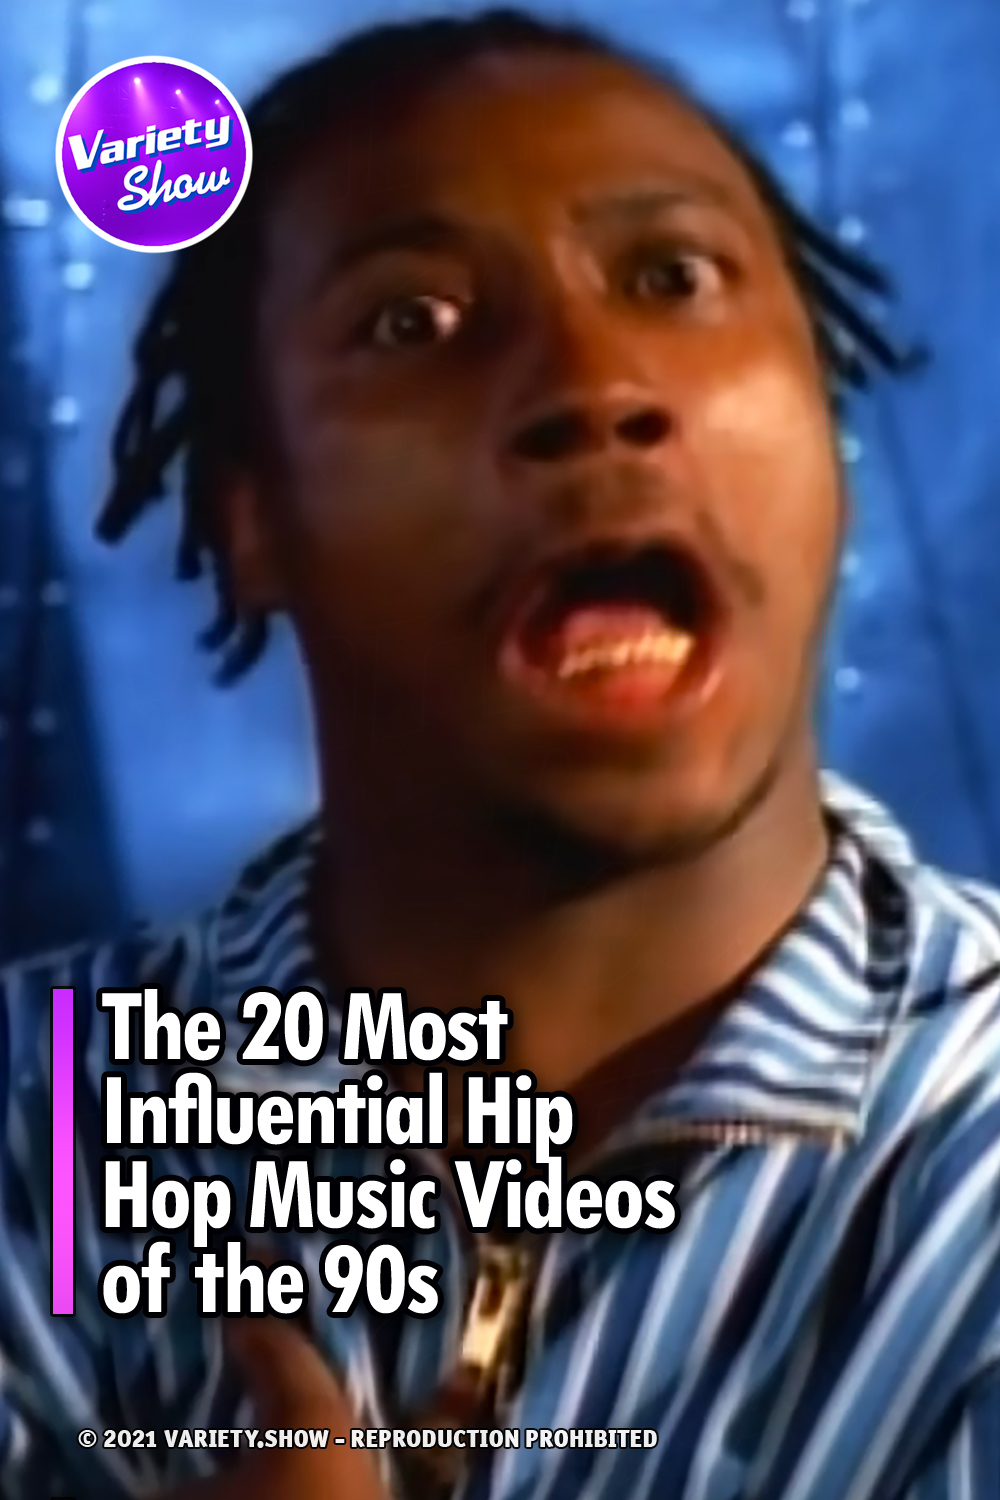 The 20 Most Influential Hip Hop Music Videos of the 90s